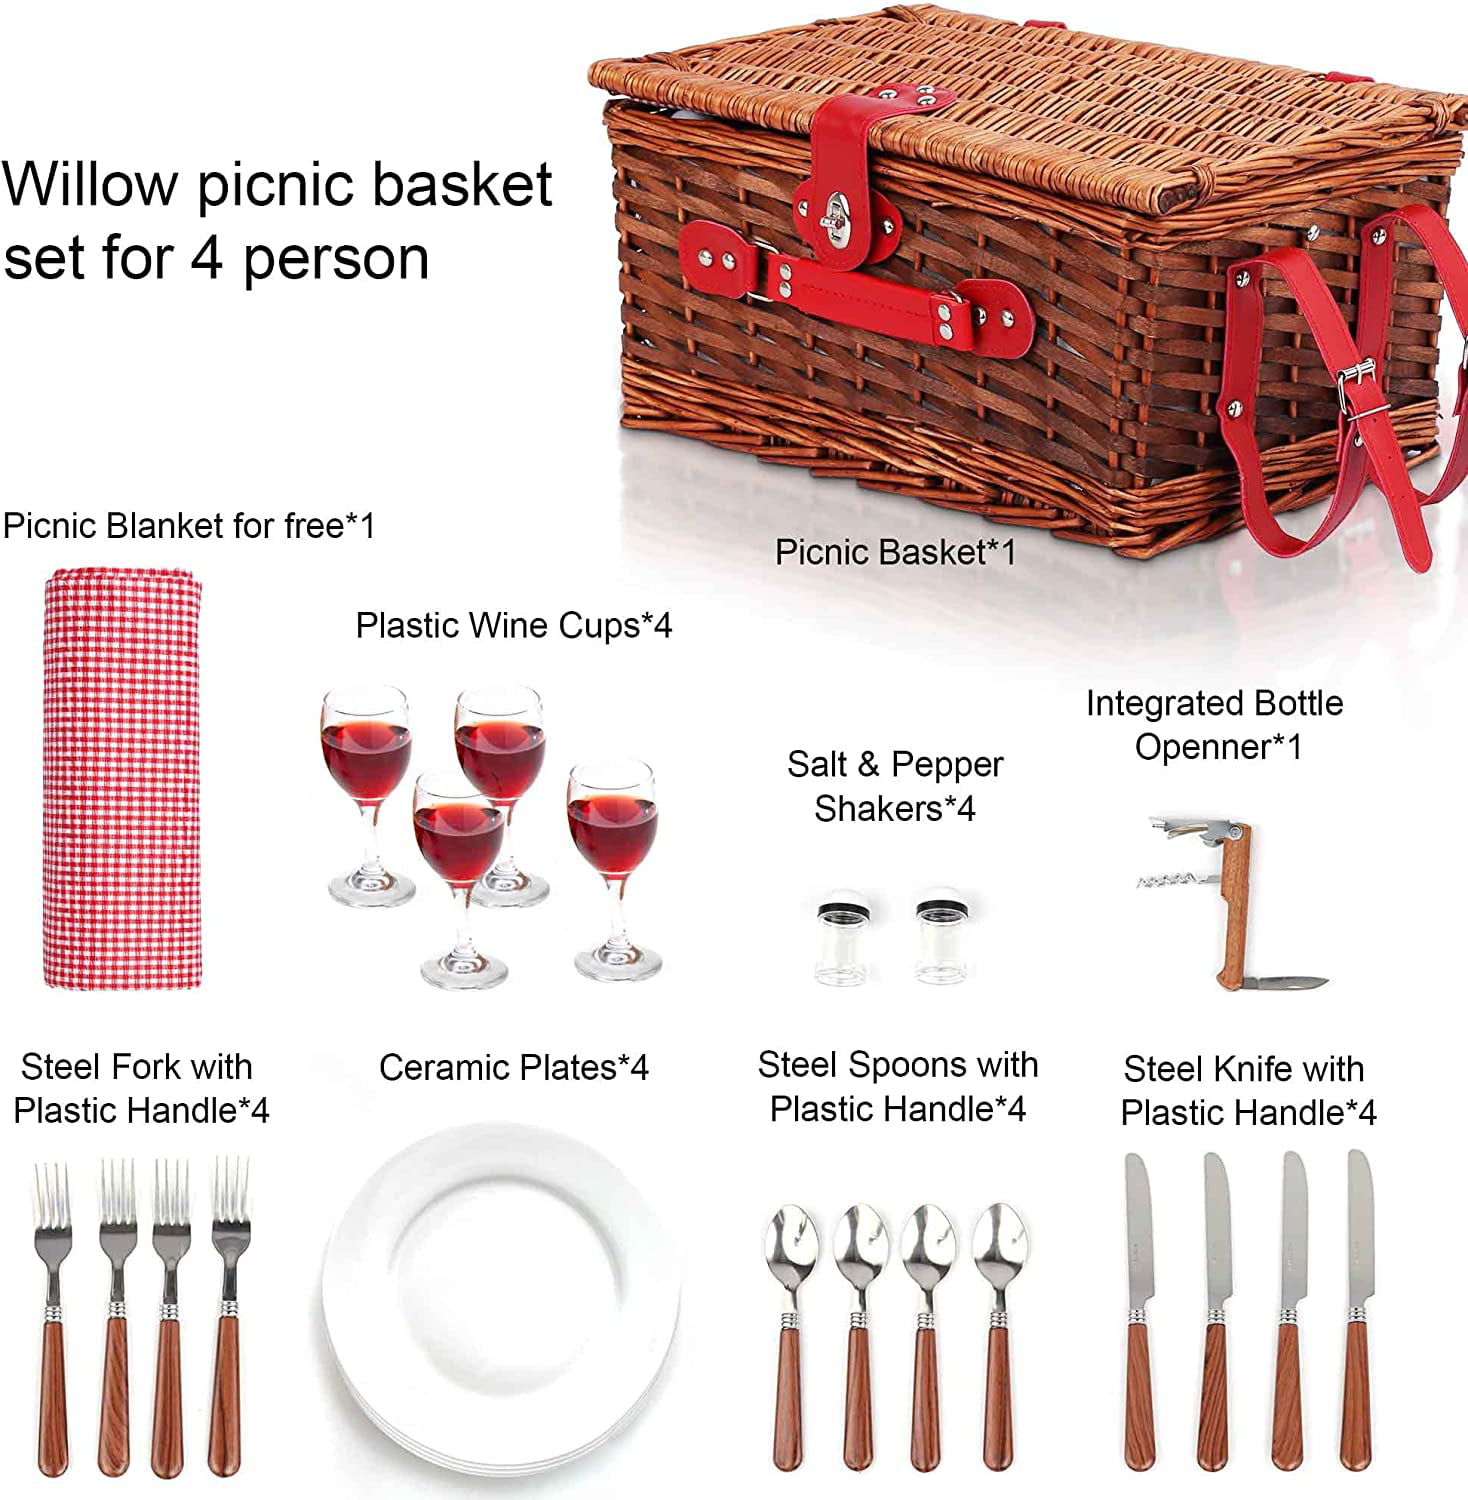 Waterproof Picnic Blanket Camping Wicker Picnic Basket Set for 4 Persons with Large Insulated Cooler Bag Outdoor Party Top Handle Willow Picnic Hamper for Family 